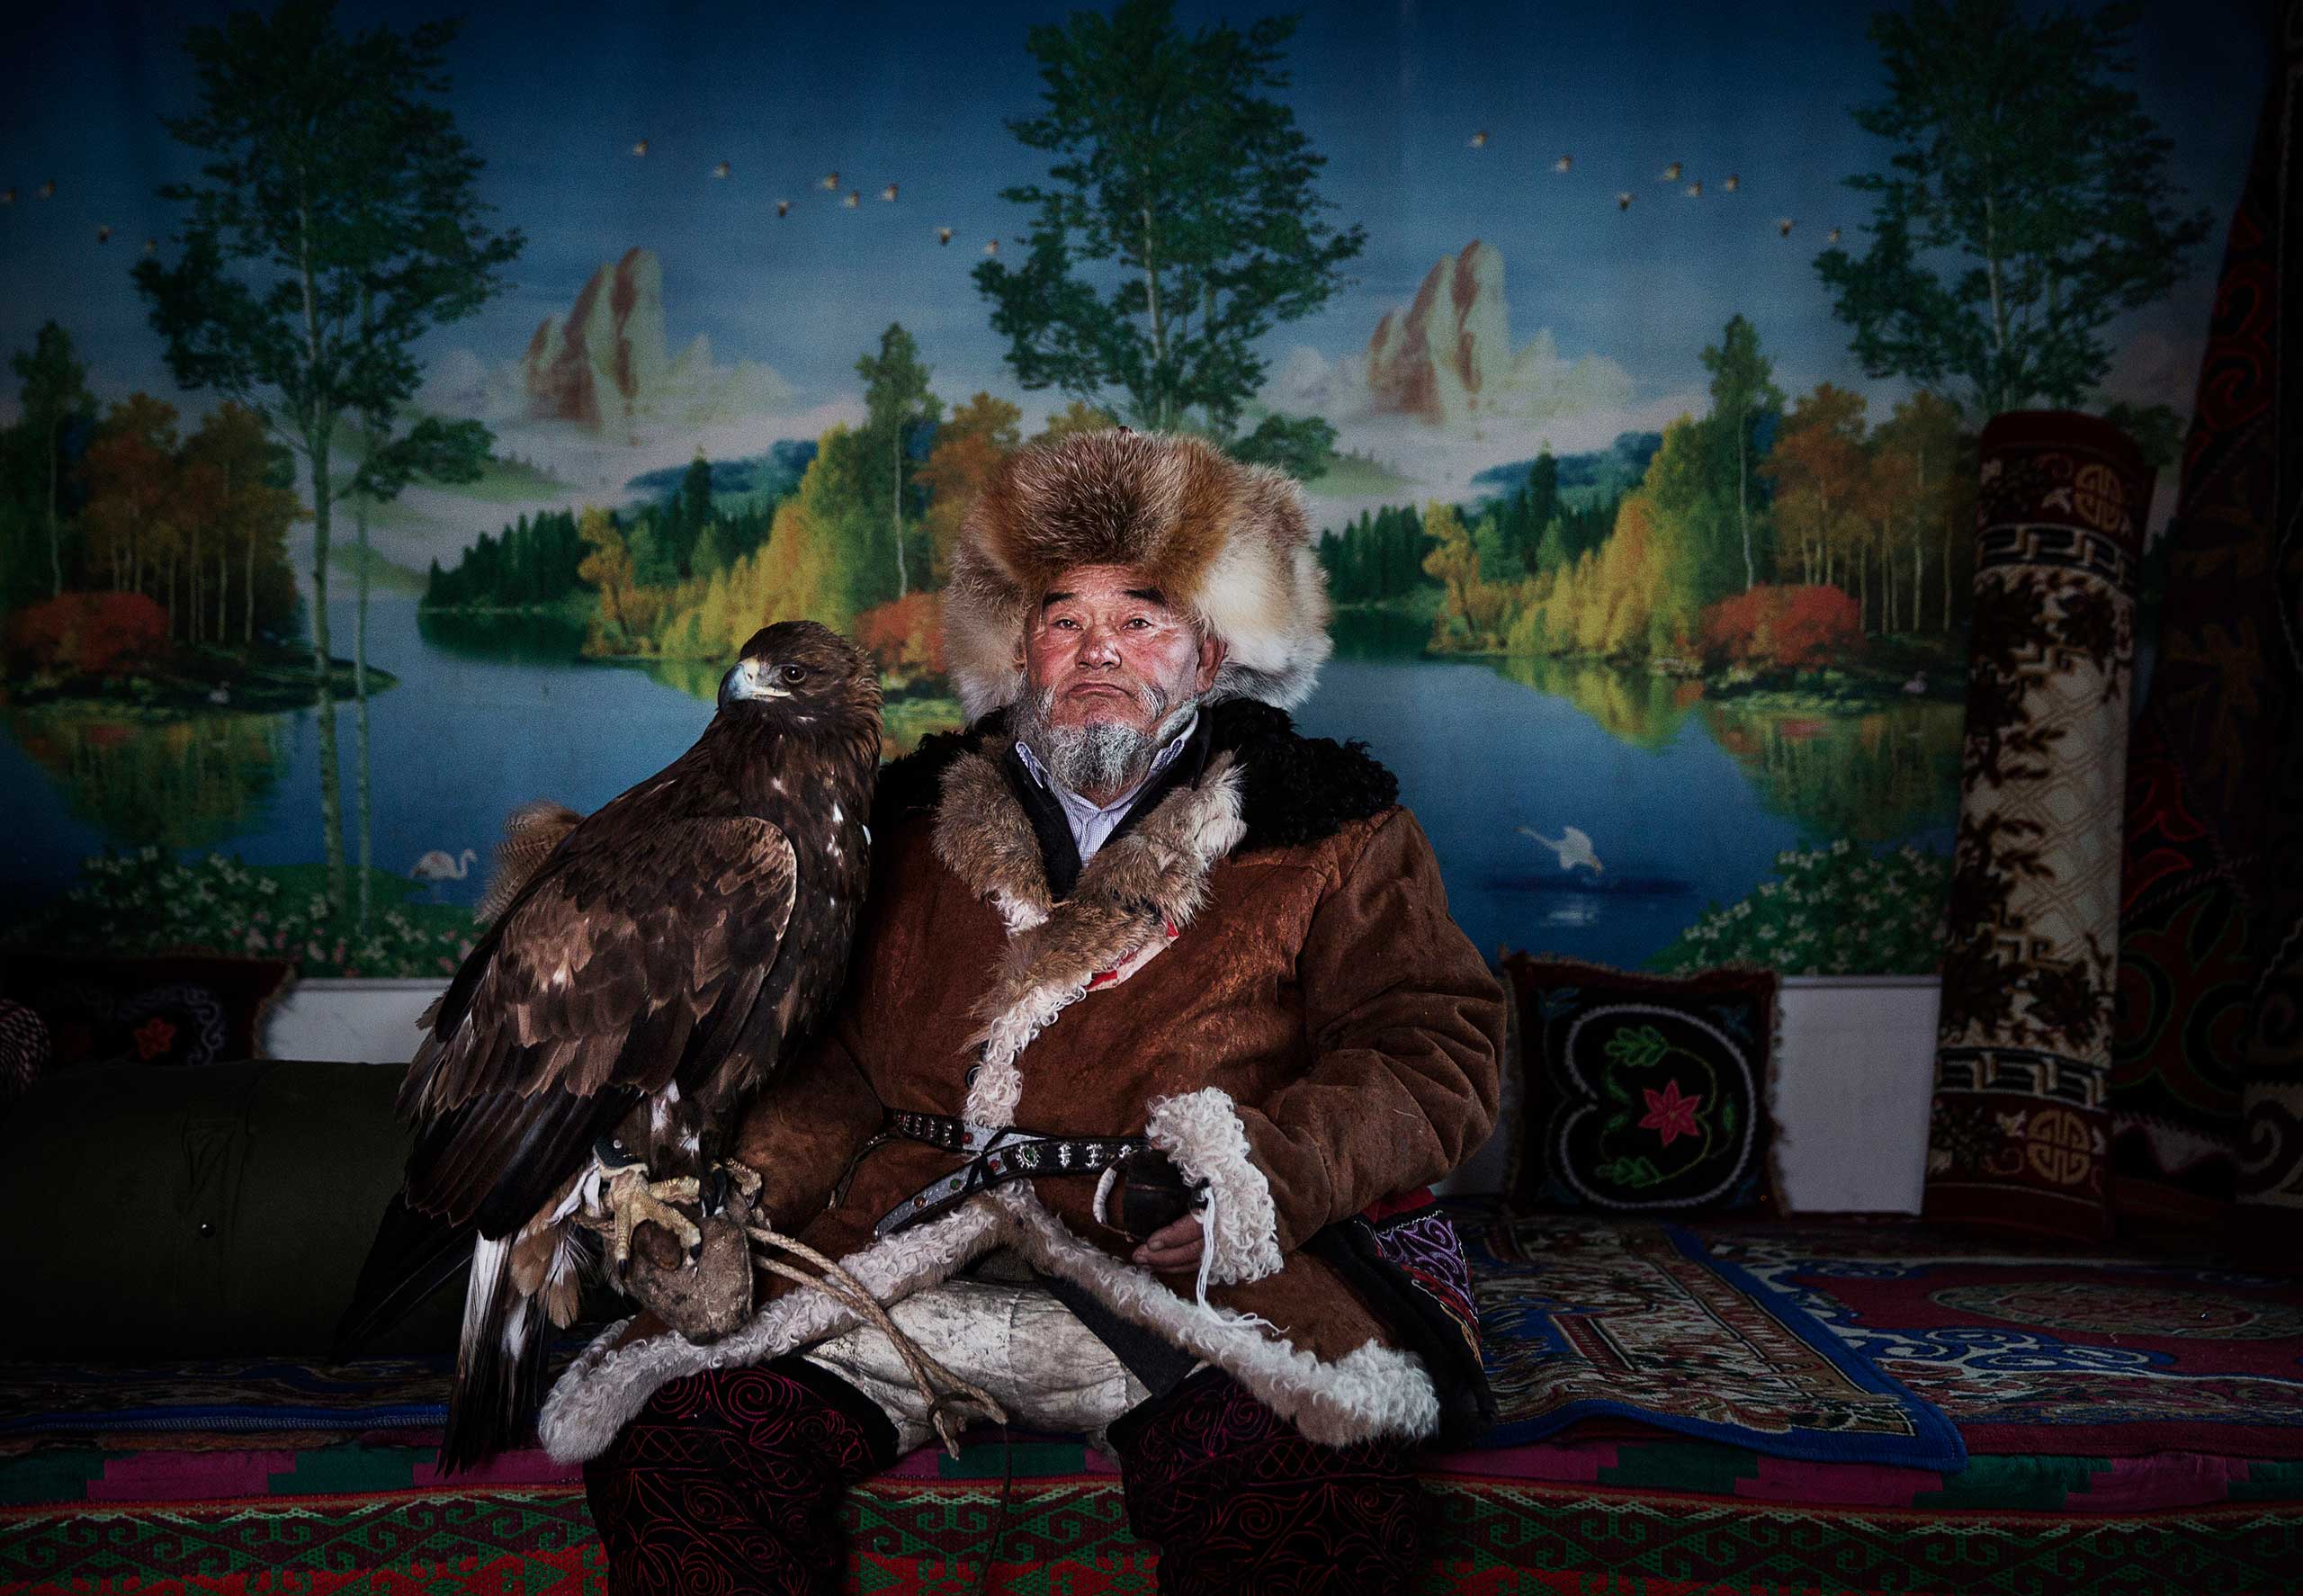 From the series: China's Kazakh Minority Preserve Culture Through Eagle Hunting in Western ChinaChinese Kazakh eagle hunter Margars Mazkin, 74 years, sits with his eagle before leaving for competition in the mountains of Qinghe County, Xinjiang, northwestern China,  Jan. 31, 2015.